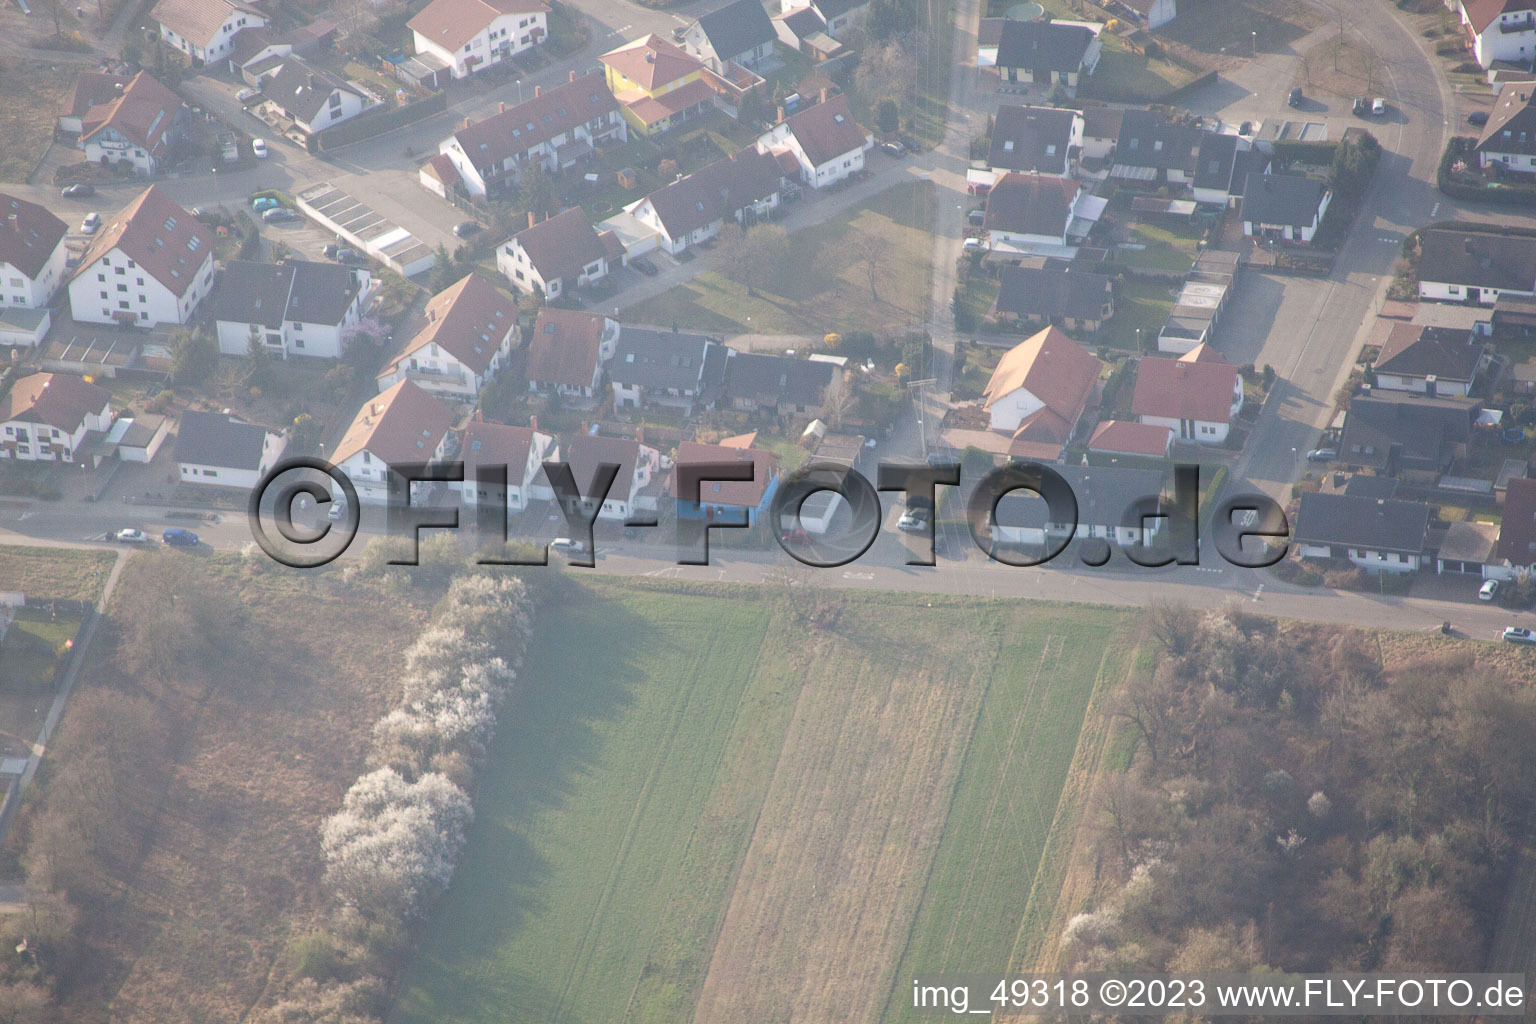 Lingenfeld in the state Rhineland-Palatinate, Germany seen from above